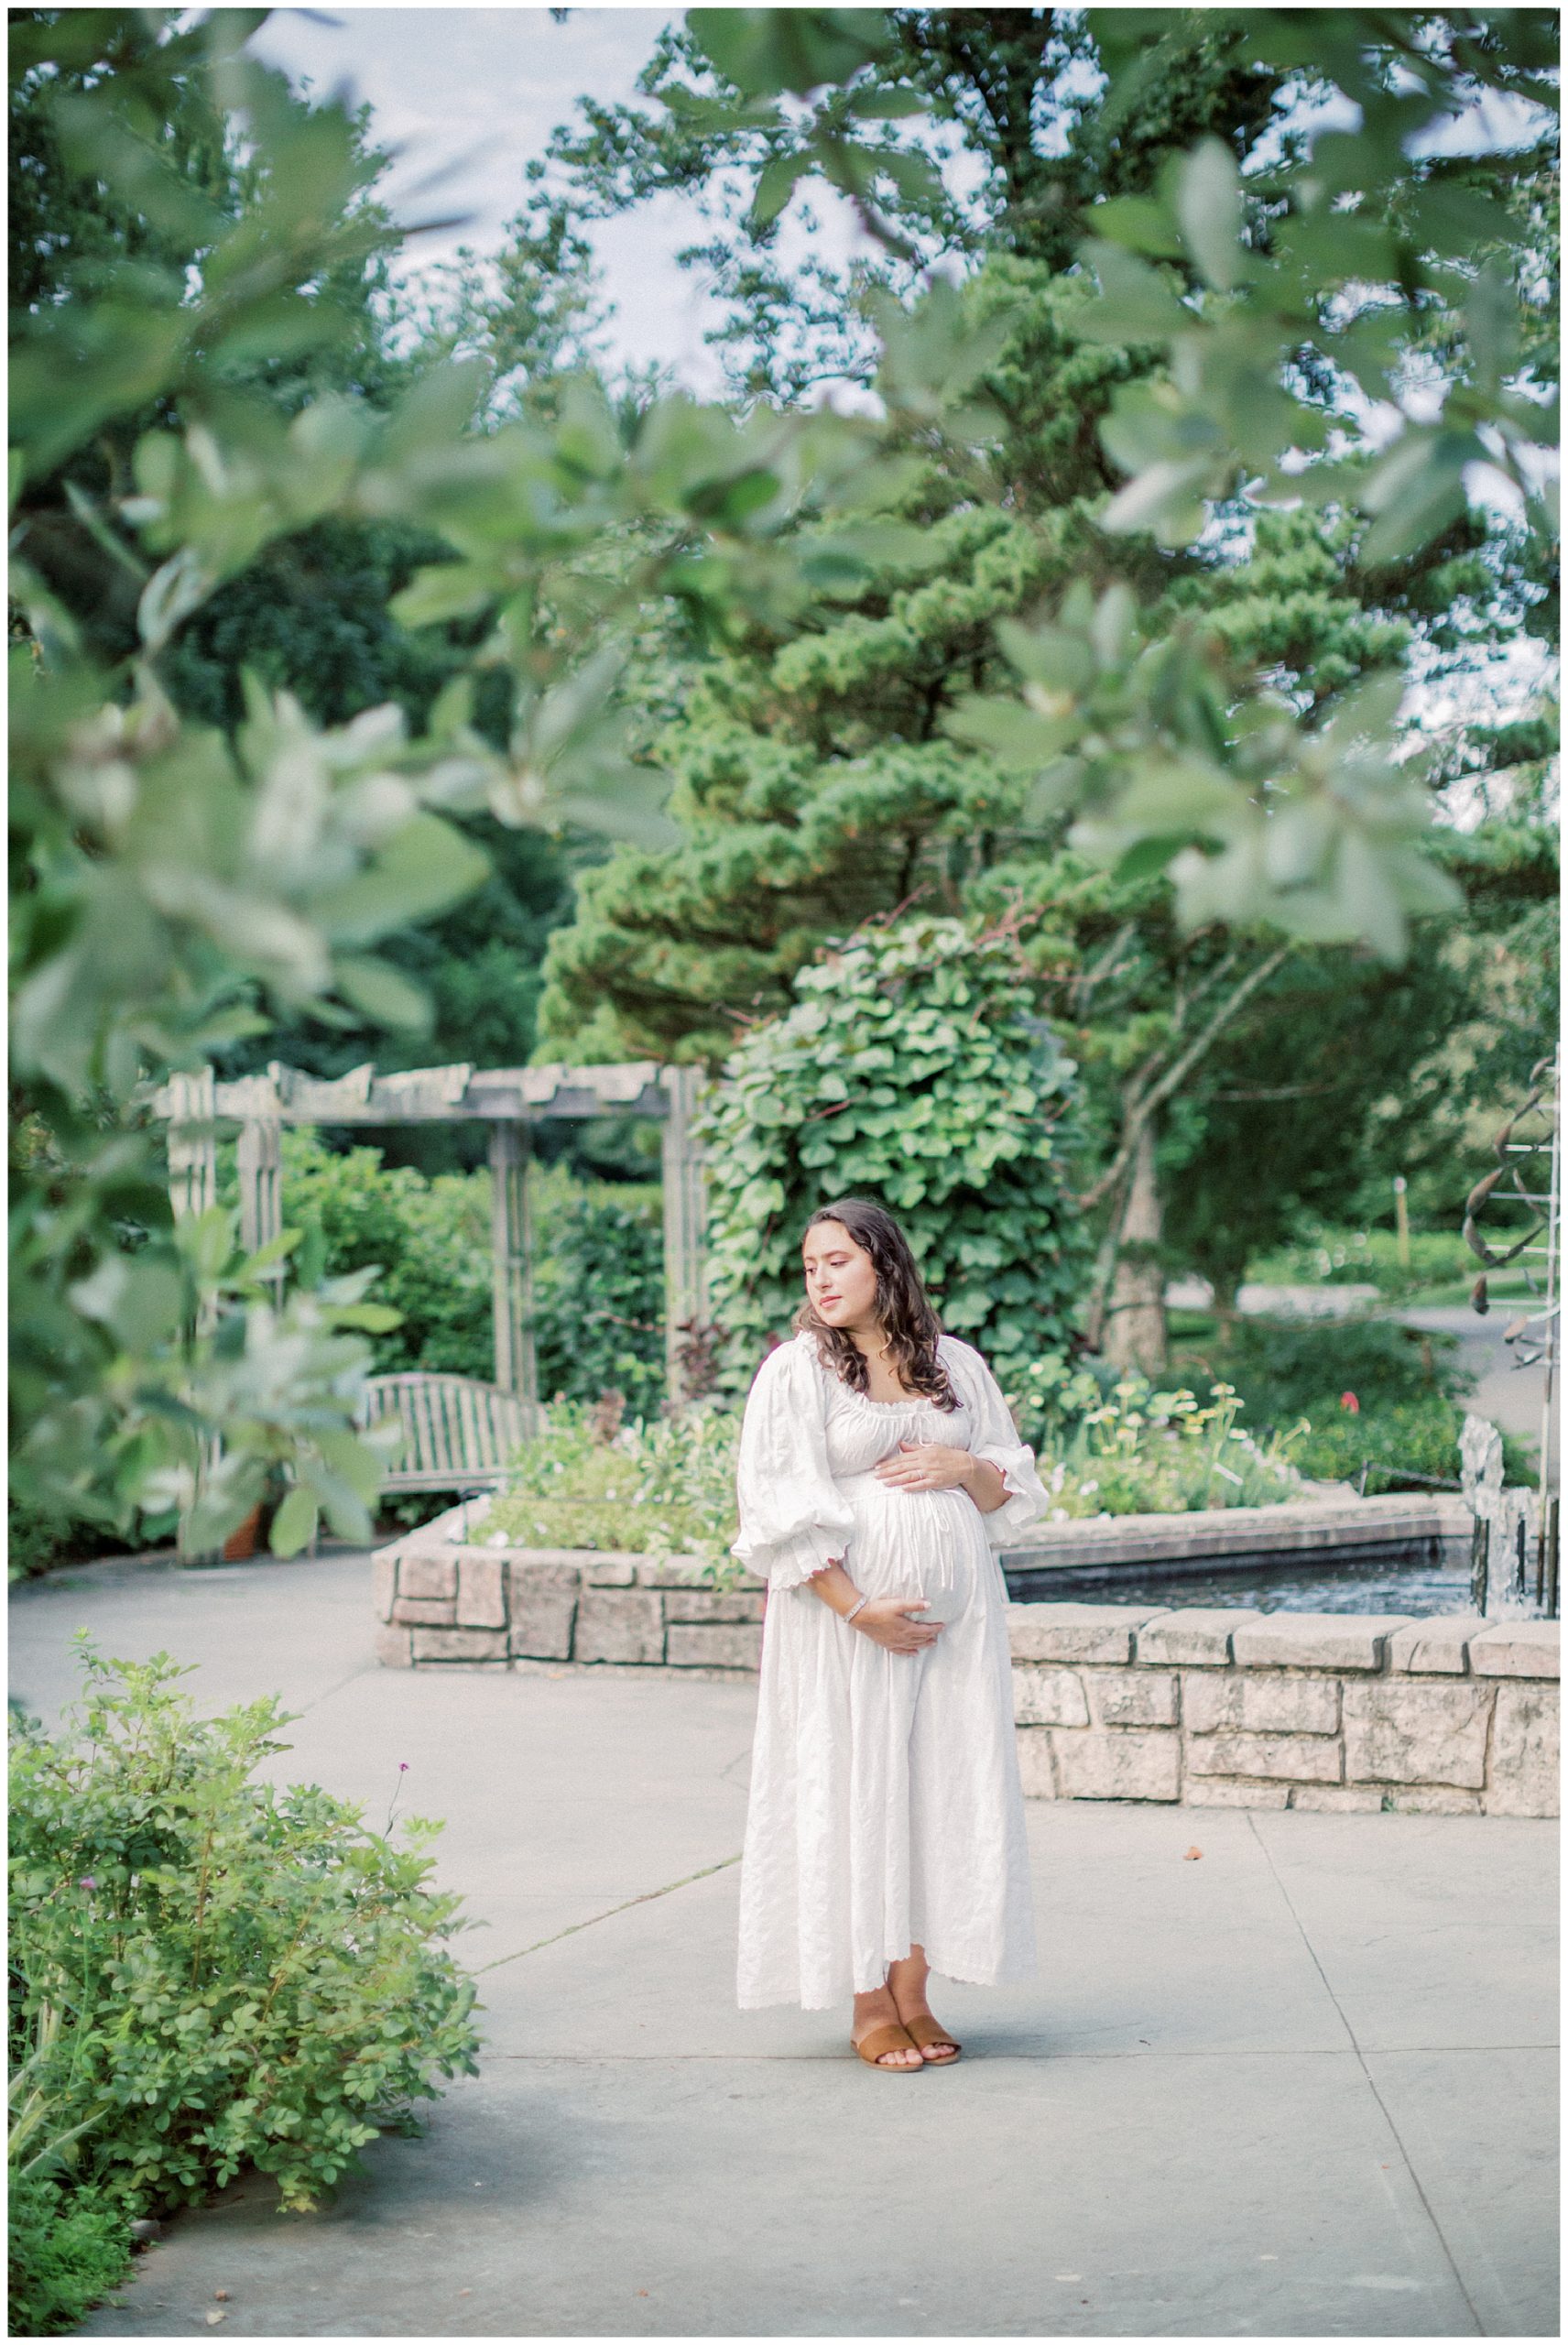 Pregnant mother in white Doen dress places one hand on top and one hand below her belly while standing in a green garden.